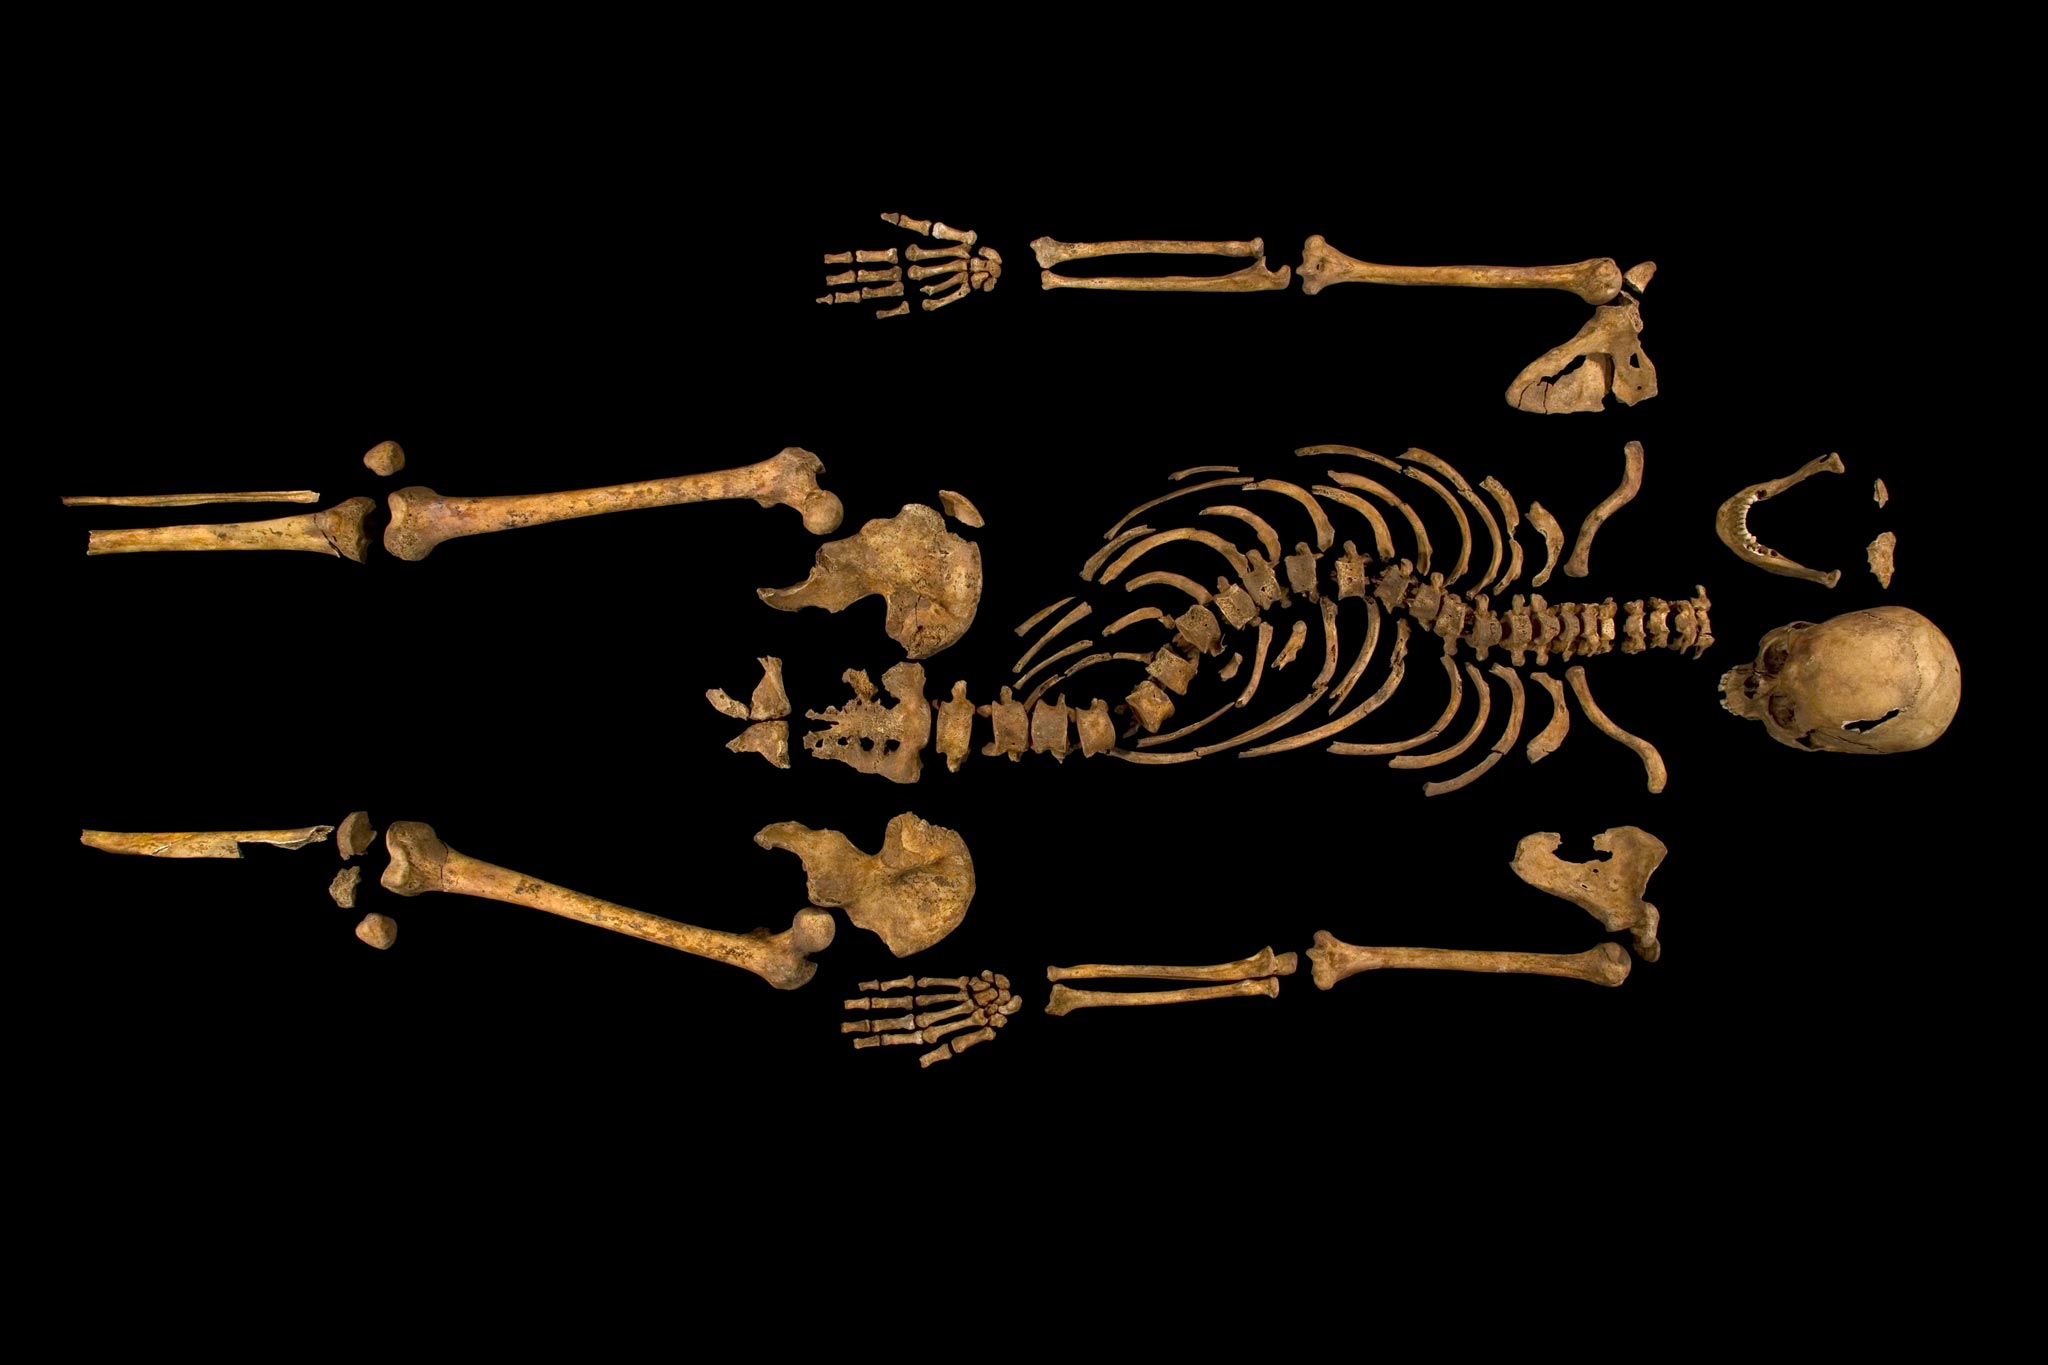 Richard III ’s remains show his scoliosis